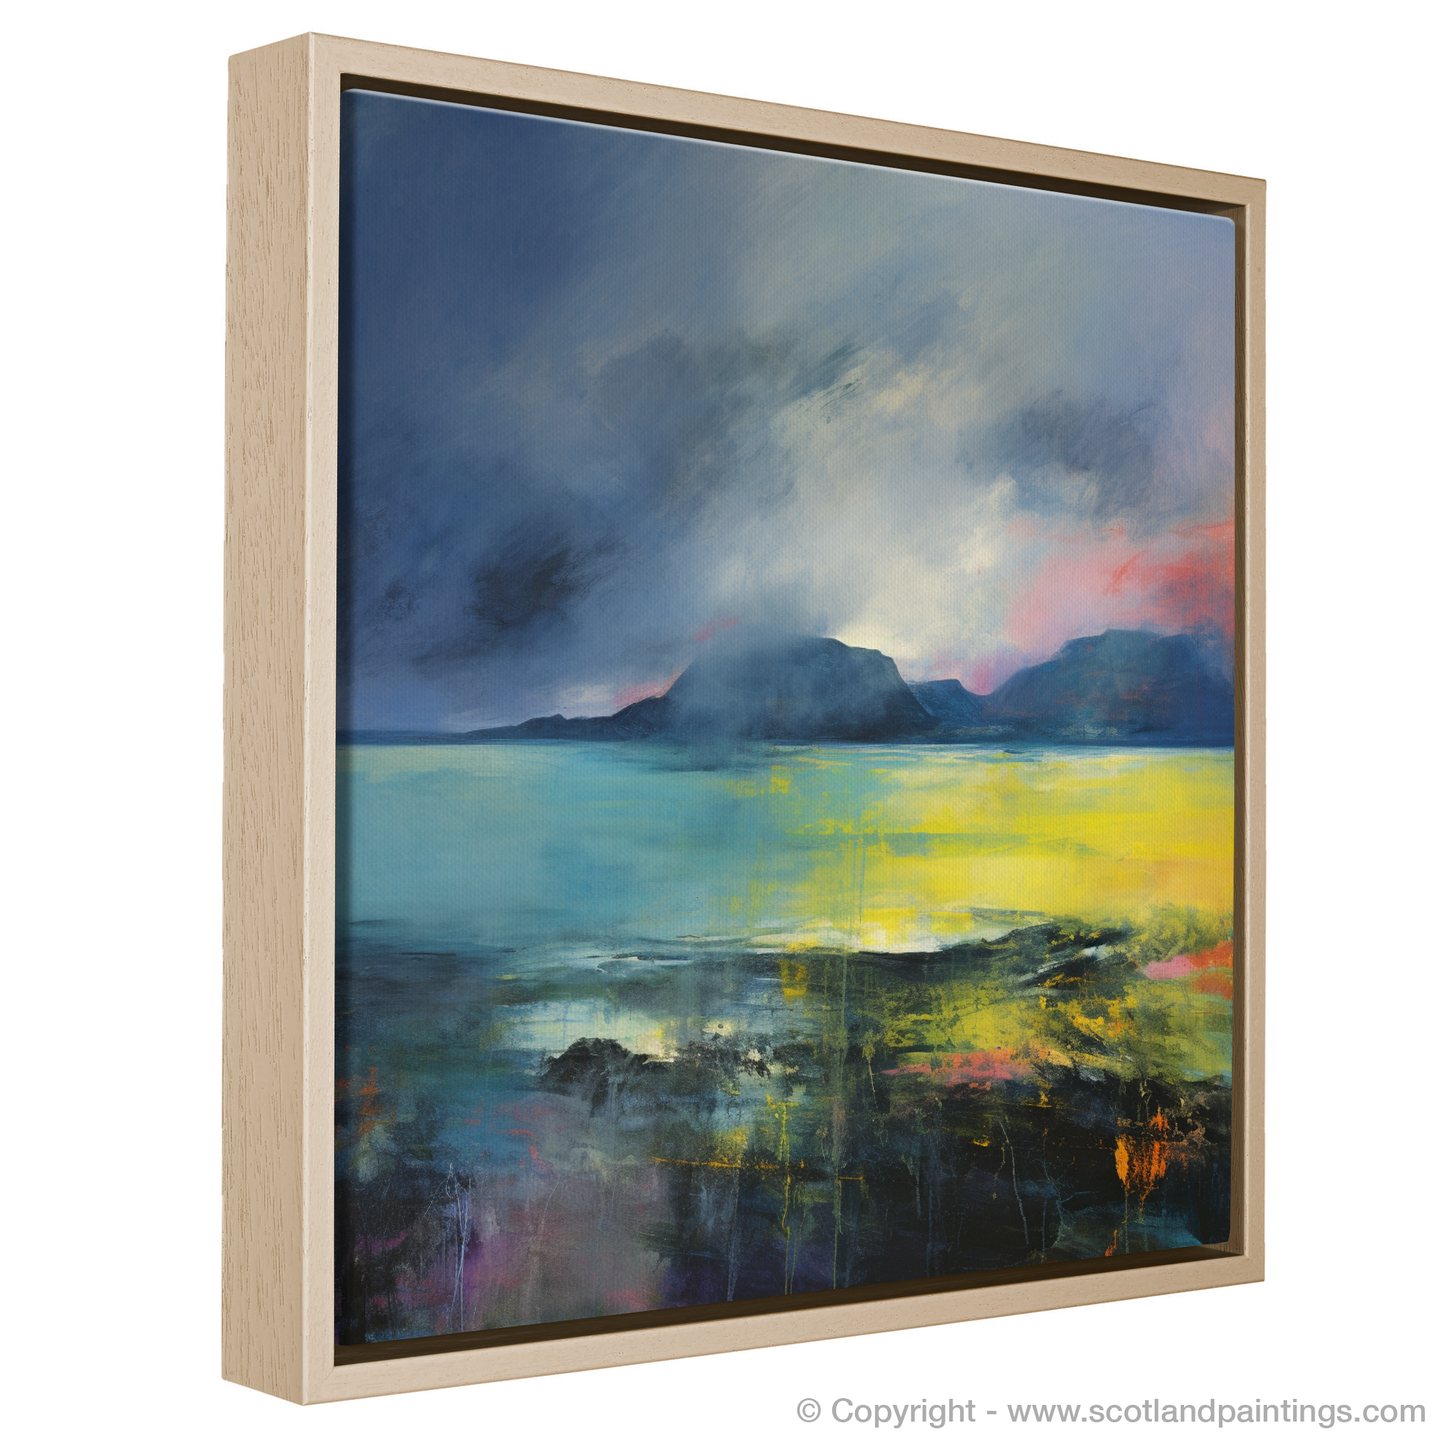 Painting and Art Print of Easdale Sound with a stormy sky entitled "Storm over Easdale Sound: An Abstract Expressionist Ode".